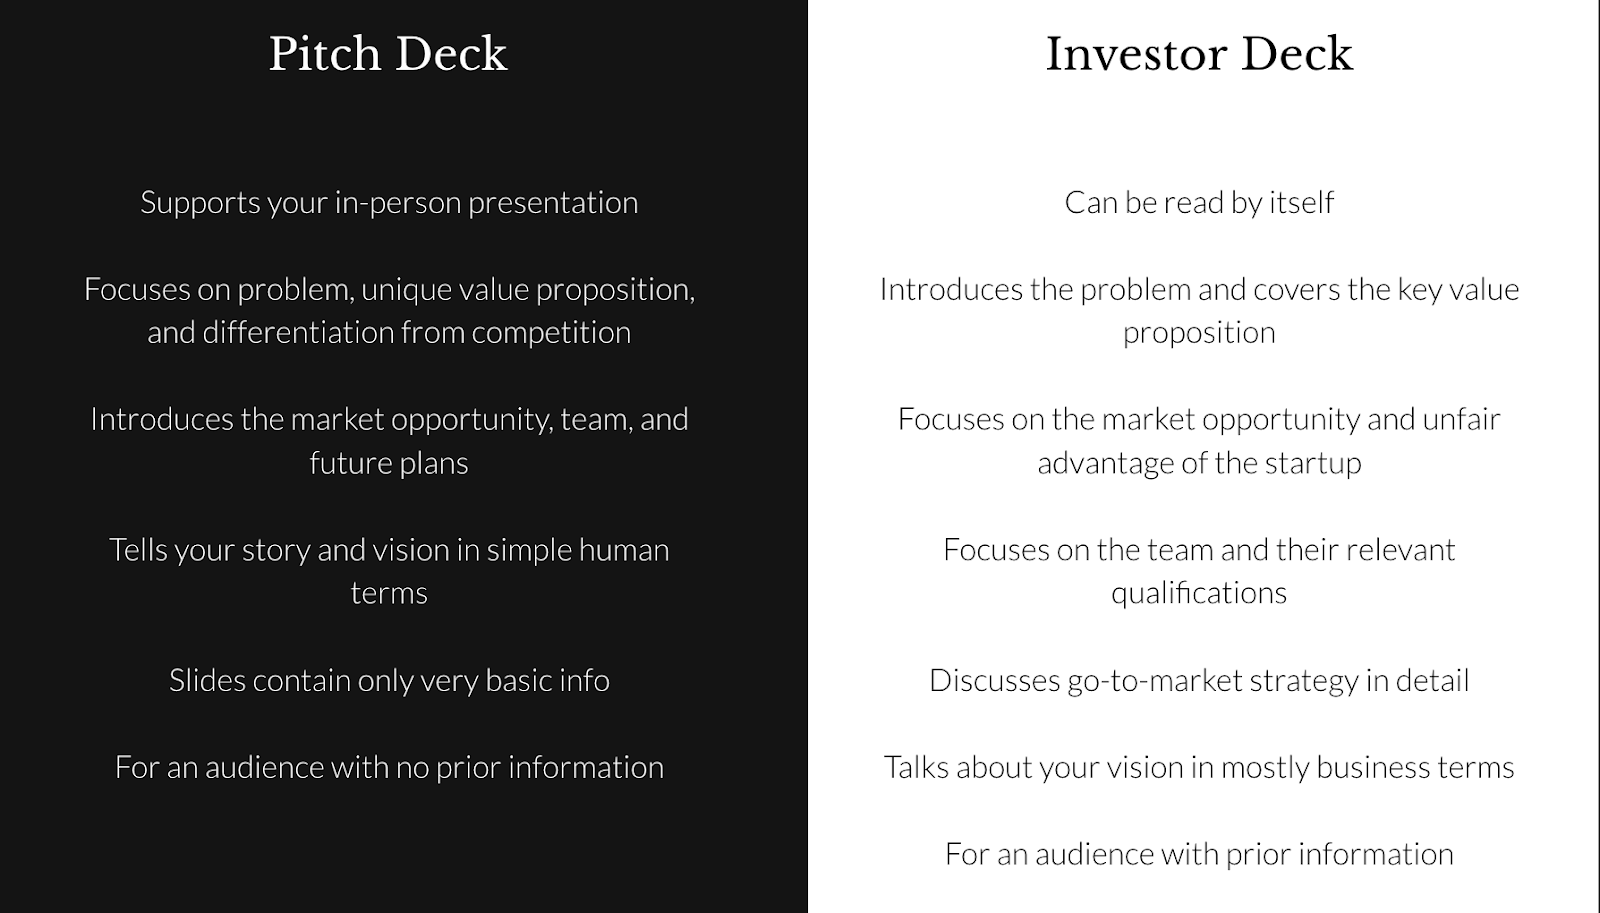 Does the perfect pitch deck structure actually exist?